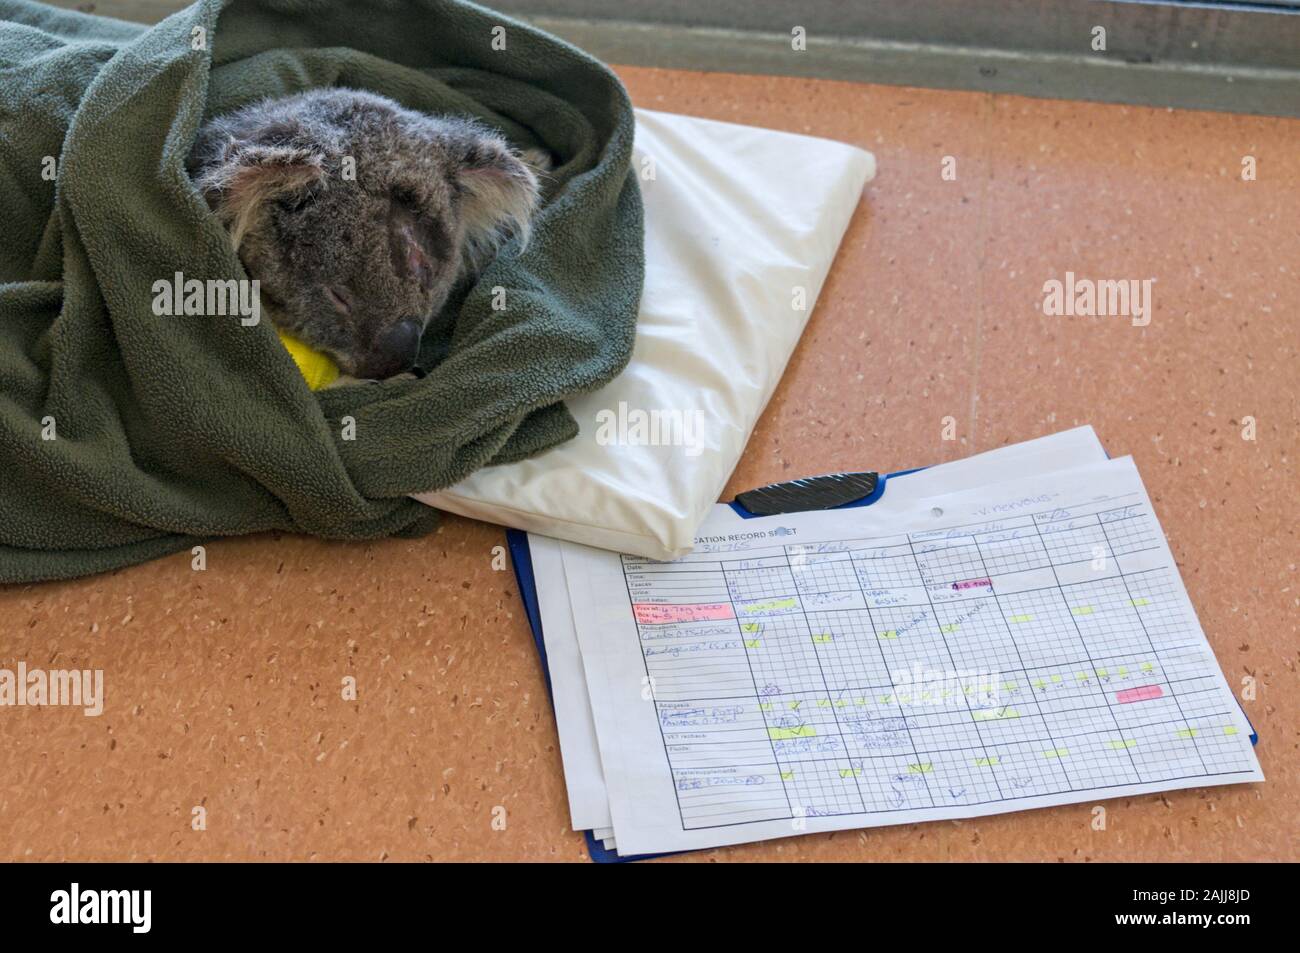 A rescued Koala wrapped in a warm blanket with its medical report, waiting for medical attention at the Australia Zoo Wildlife Hospital on the Sunshin Stock Photo